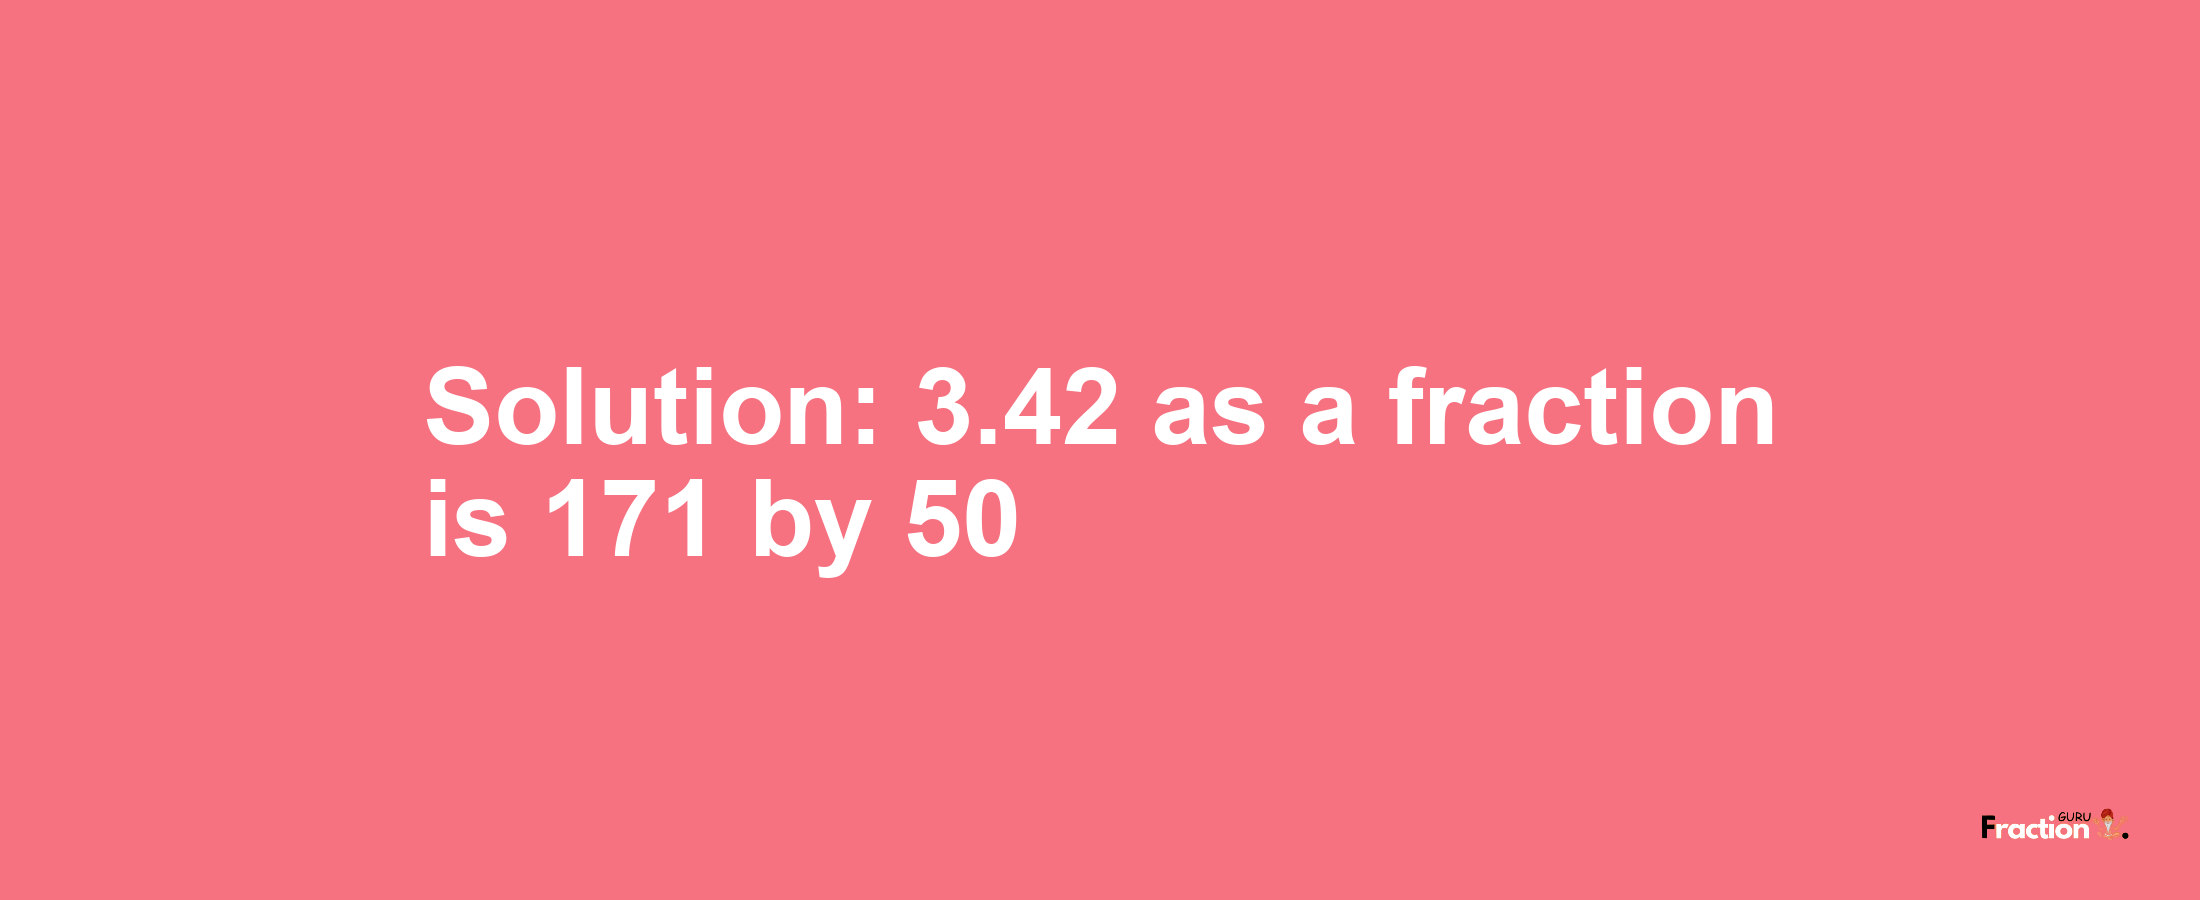 Solution:3.42 as a fraction is 171/50